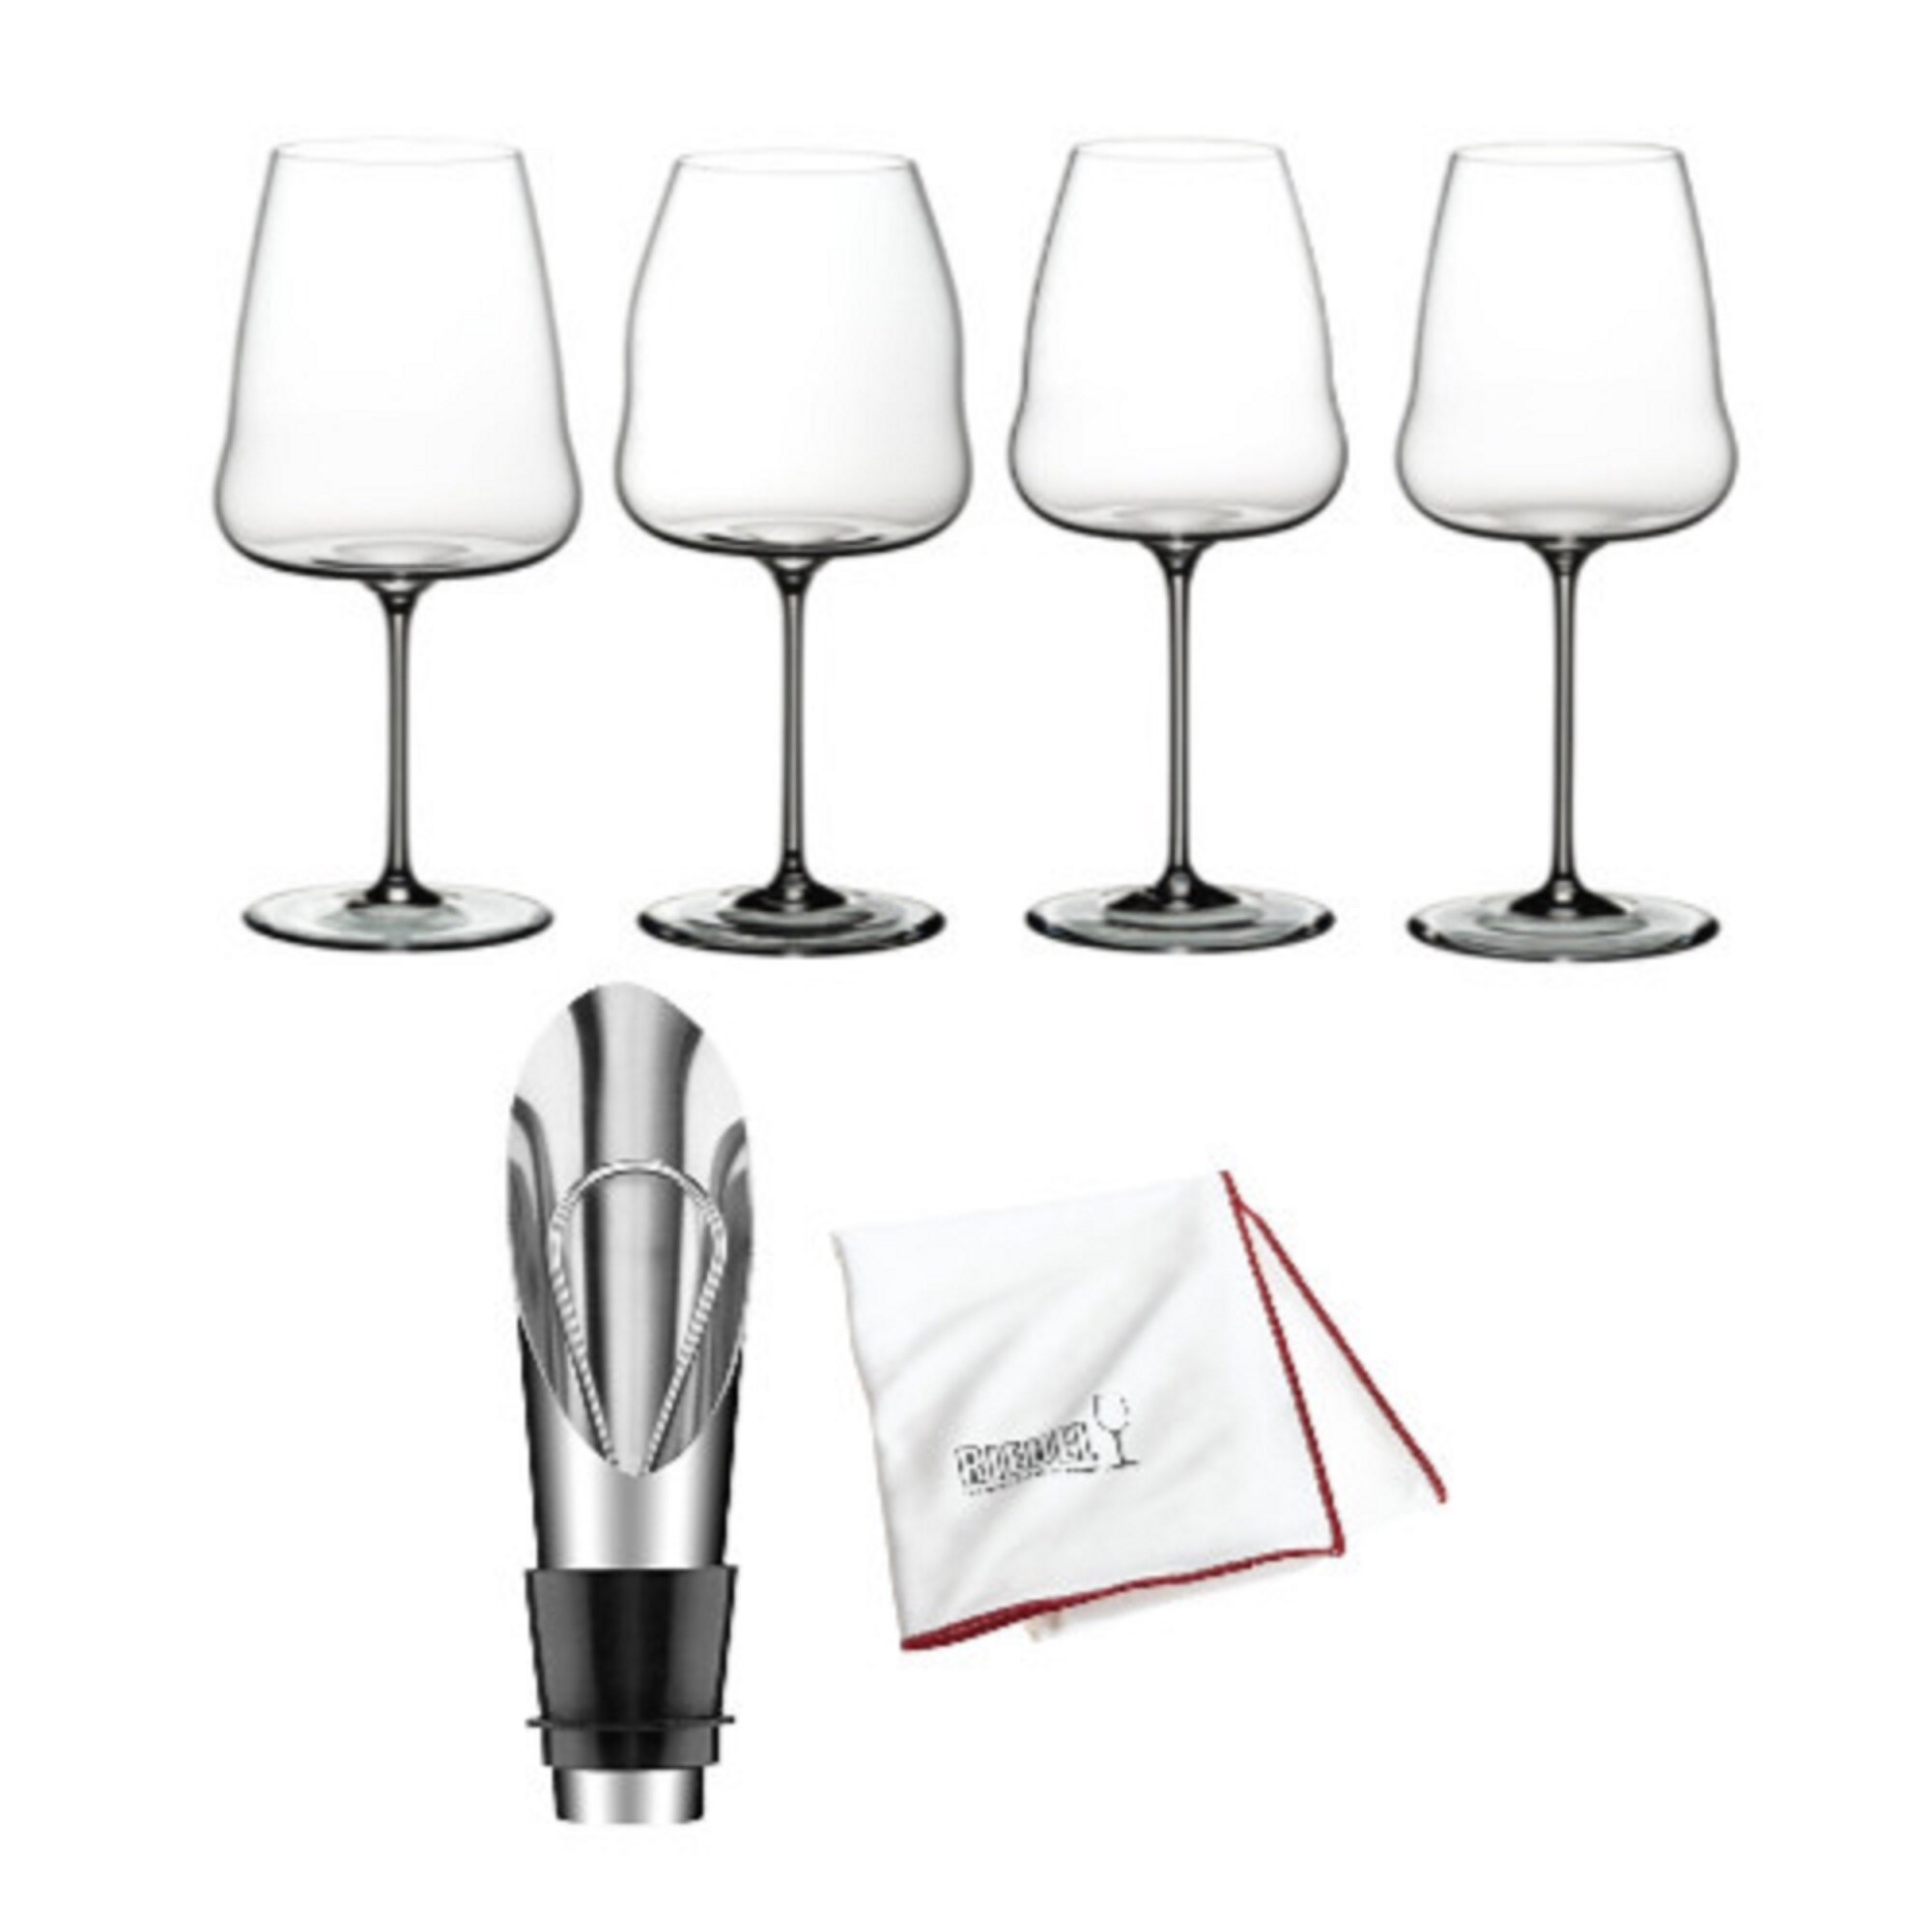 https://ak1.ostkcdn.com/images/products/is/images/direct/8154bb42fbe105a259051c1cabeff3165f69d5da/Riedel-Winewings-Tasting-Wine-Glass-Set-%284Pk%29-w--Pourer-%26-Cloth-Bundle.jpg